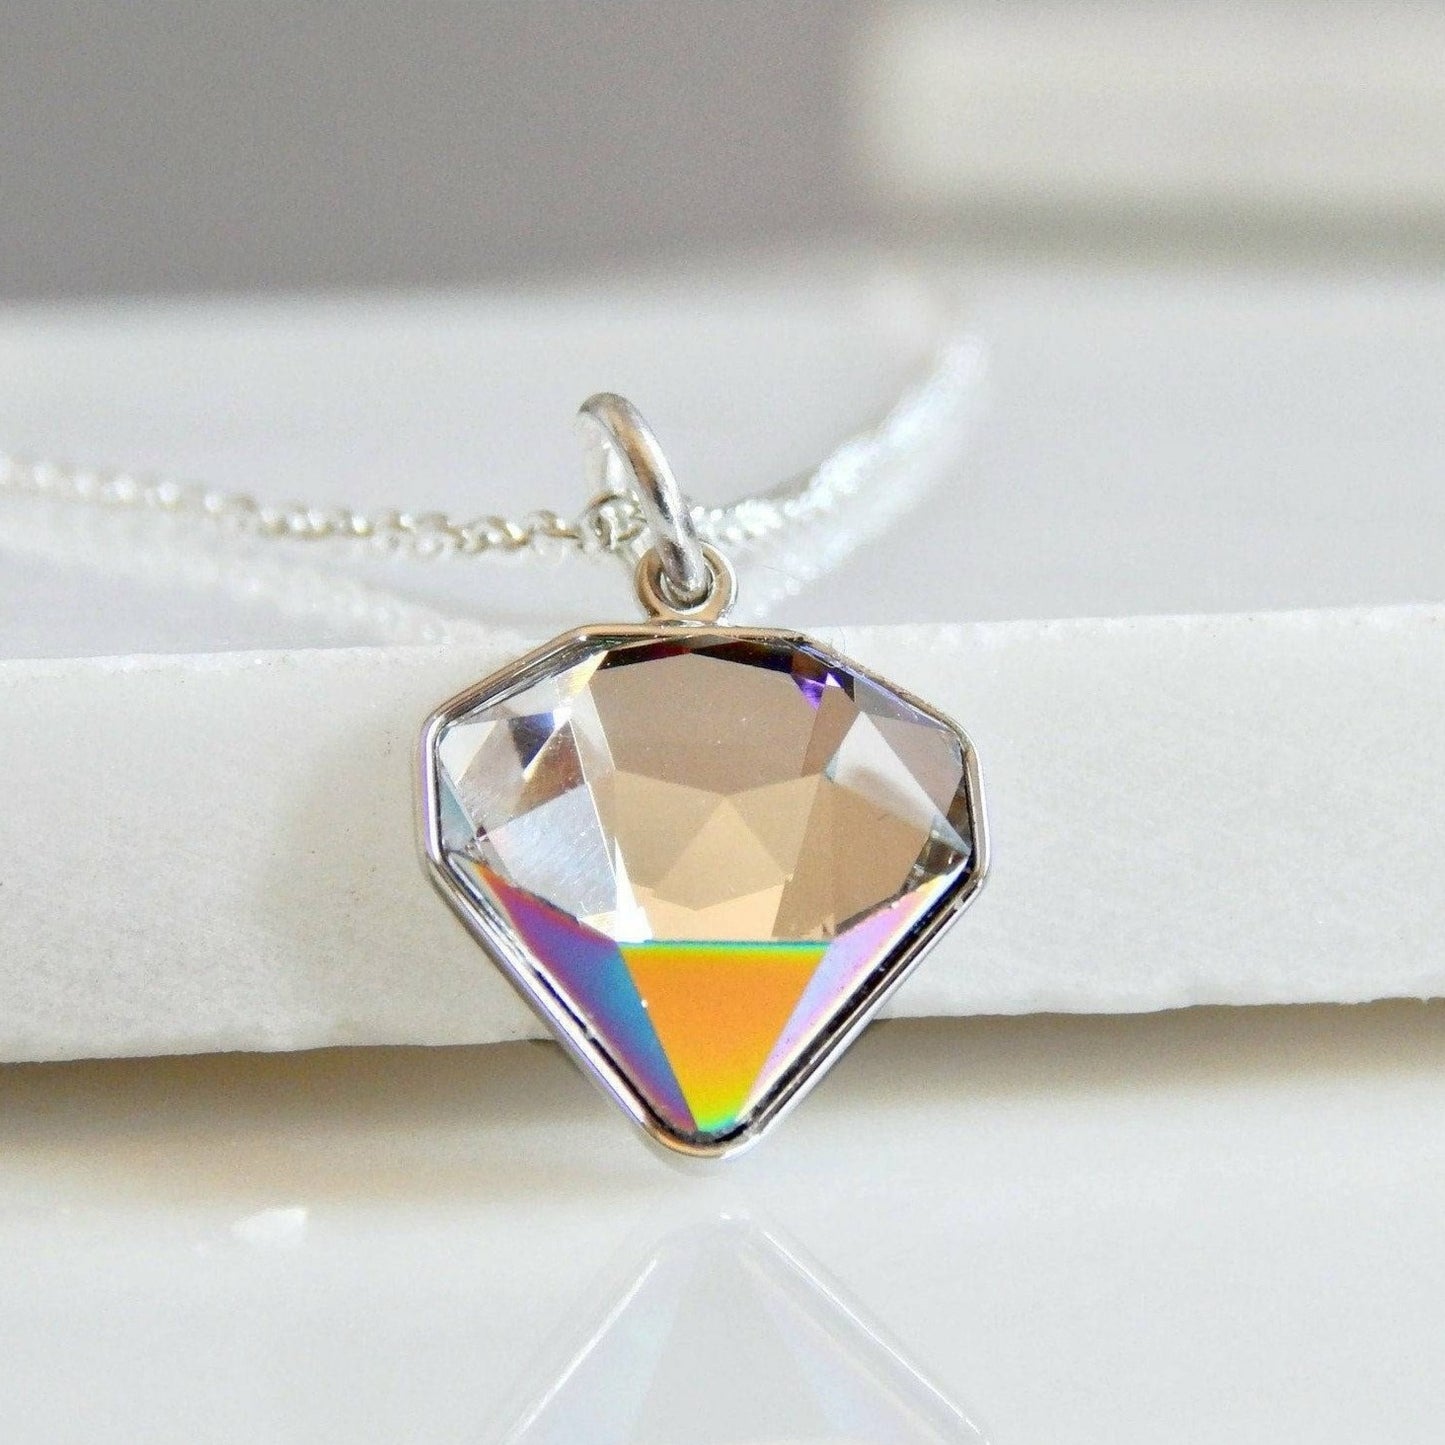 Crystal bling necklace with rainbow coating